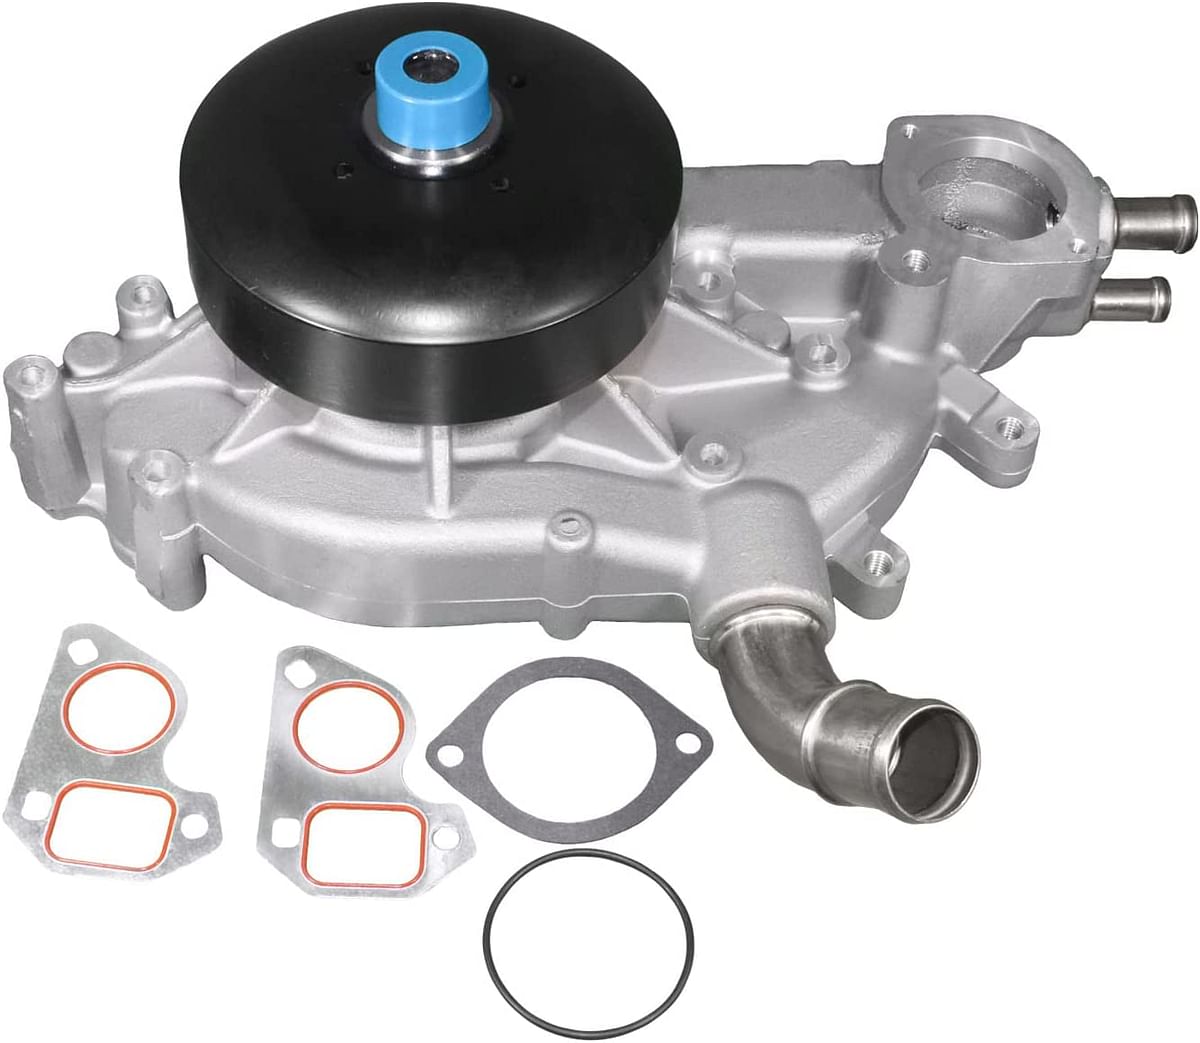 ACDelco 252-845 Professional Water Pump Kit/Silver/One size